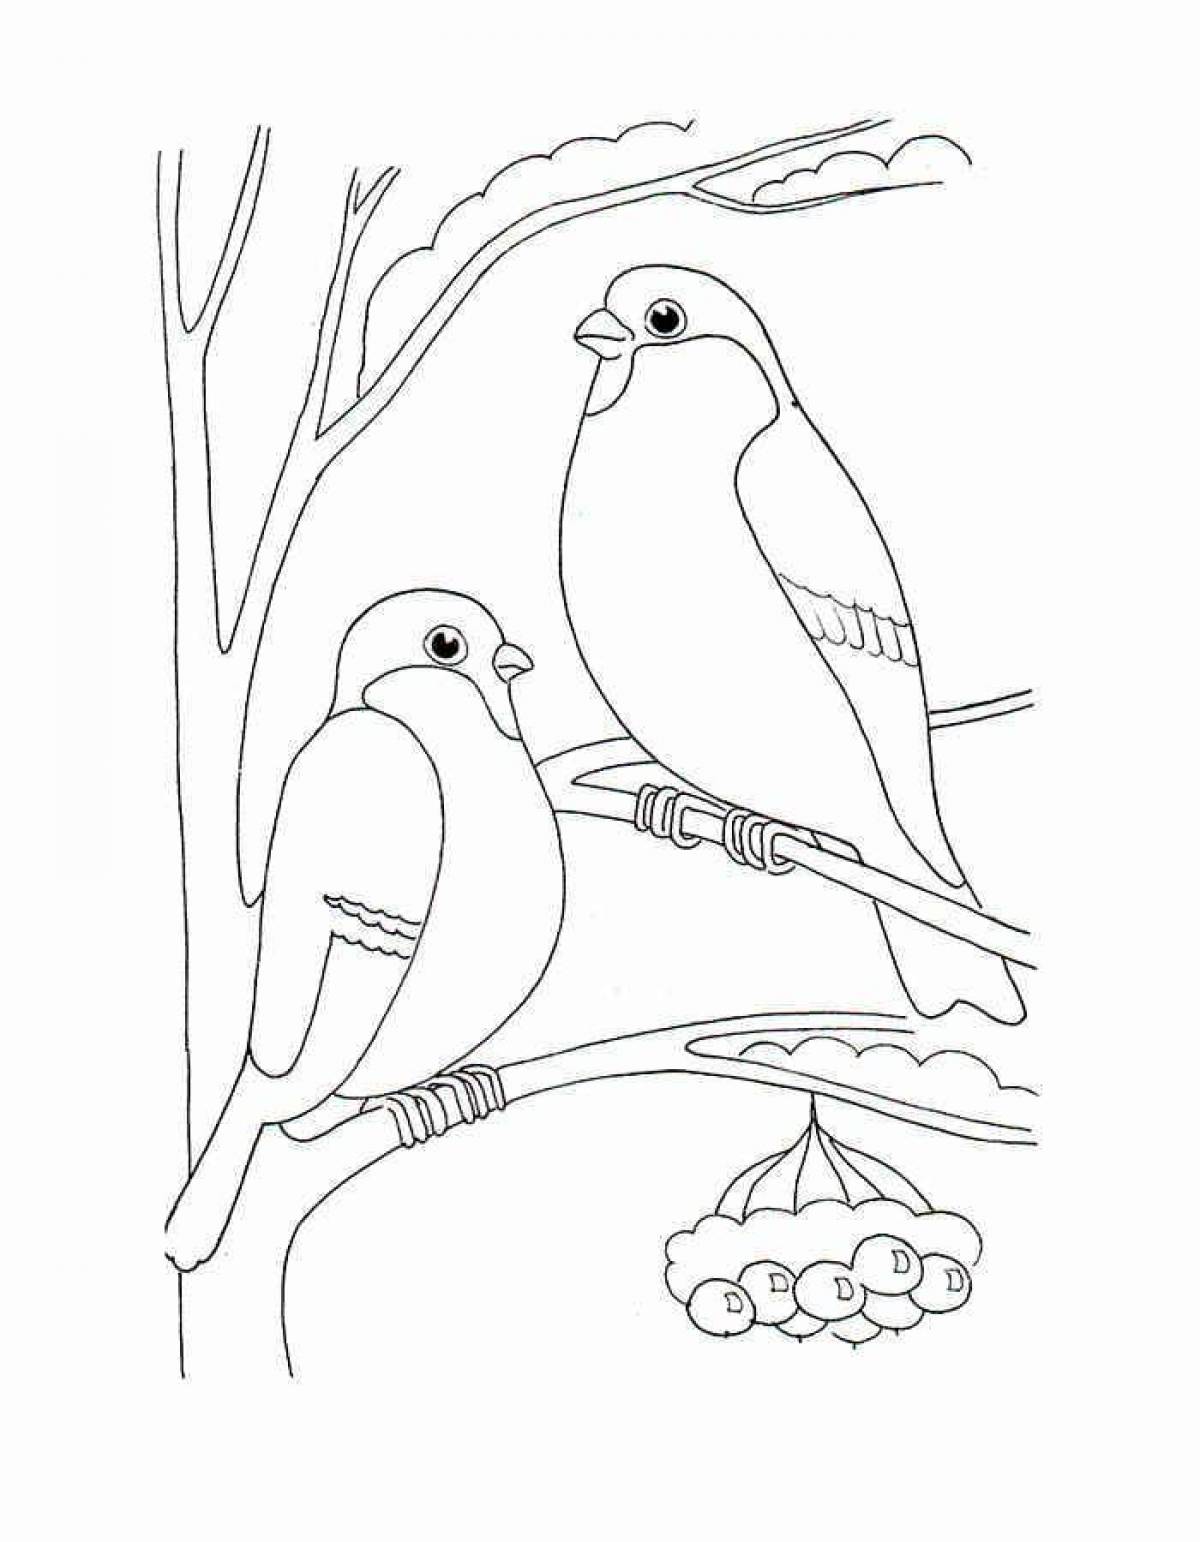 Colouring funny bullfinch for the little ones